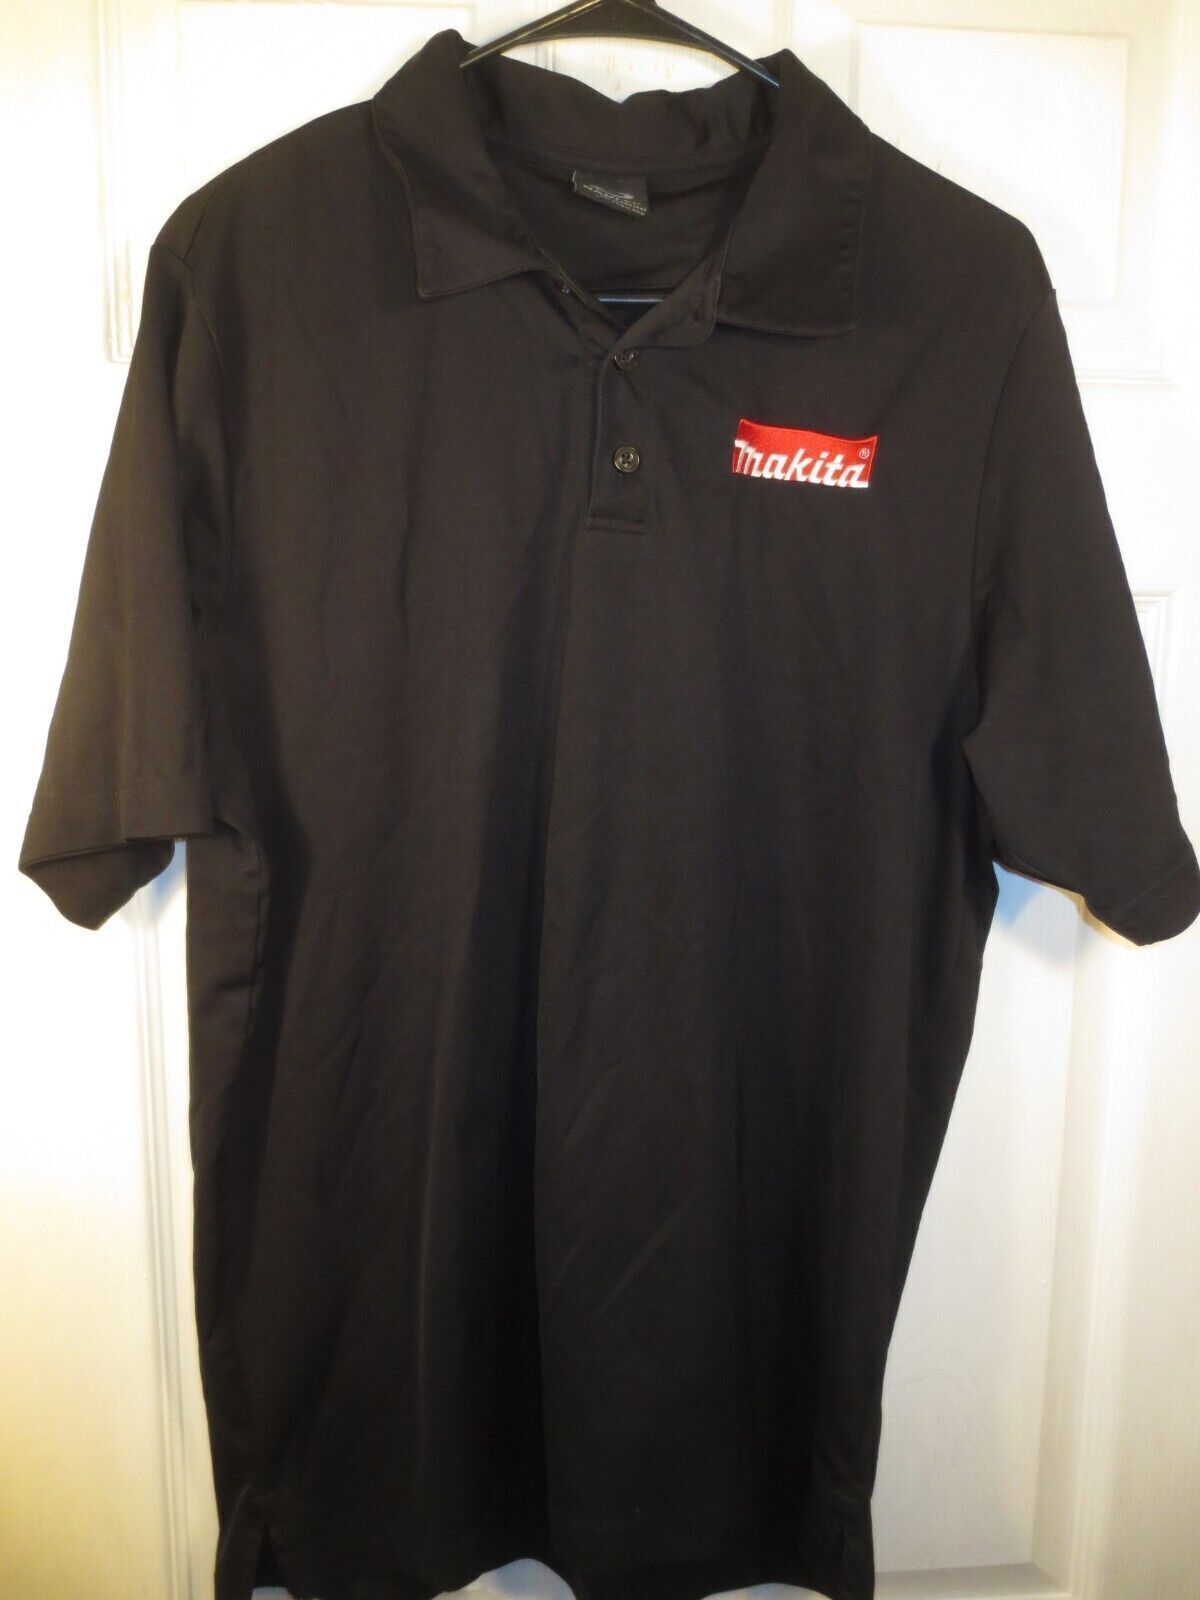 OAKLEY MAKITA POWER TOOLS Embroidered 100% Poly Black Polo Shirt Size XL